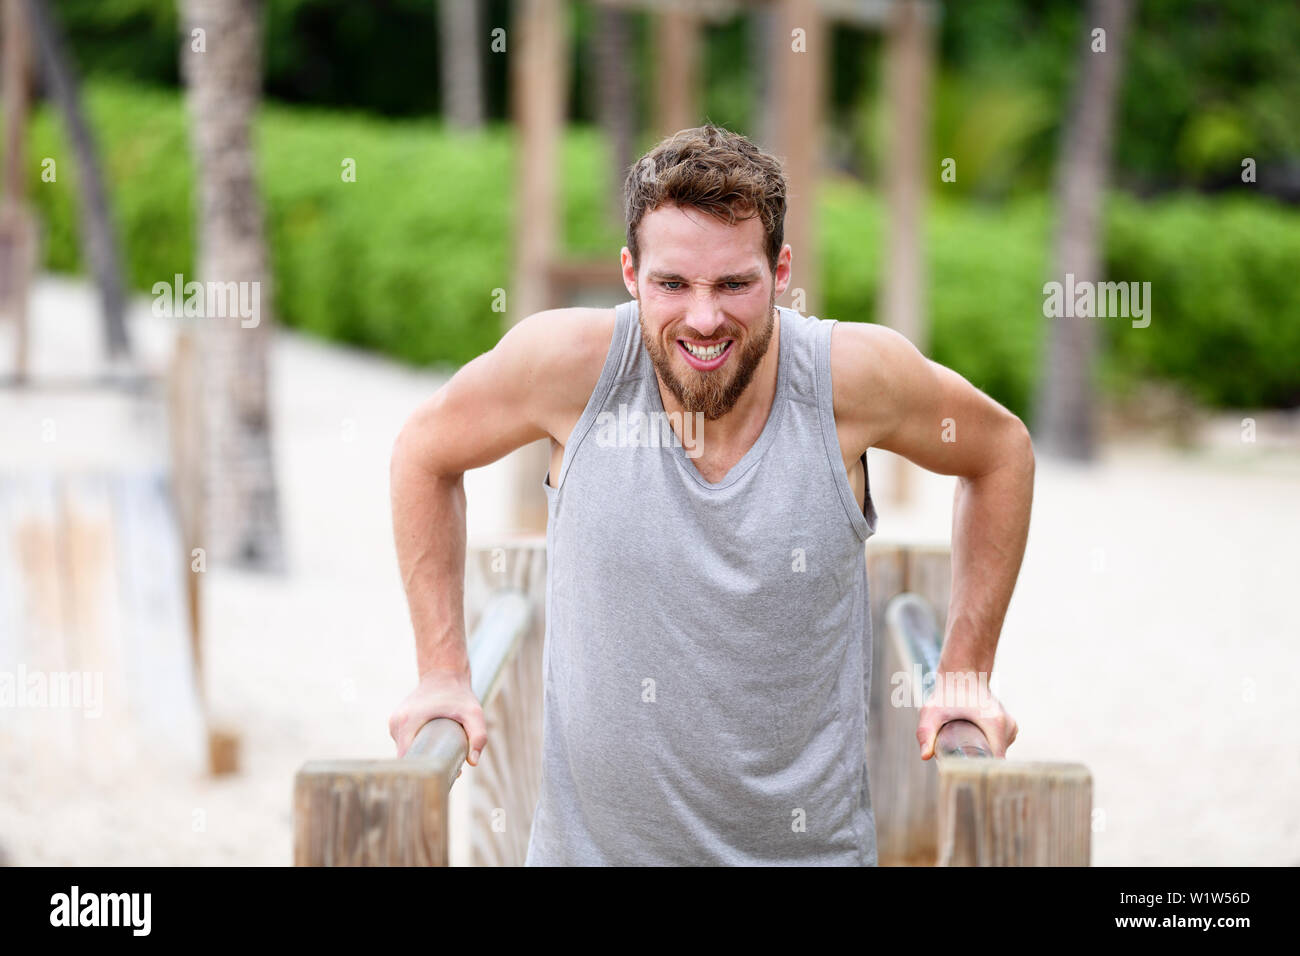 Fitness man doing dips at outdoor gym workout. Male athlete doing strength training on parallel bars in monkey jungle gym on beach. Guy exercising arms doing hard exercises. Stock Photo